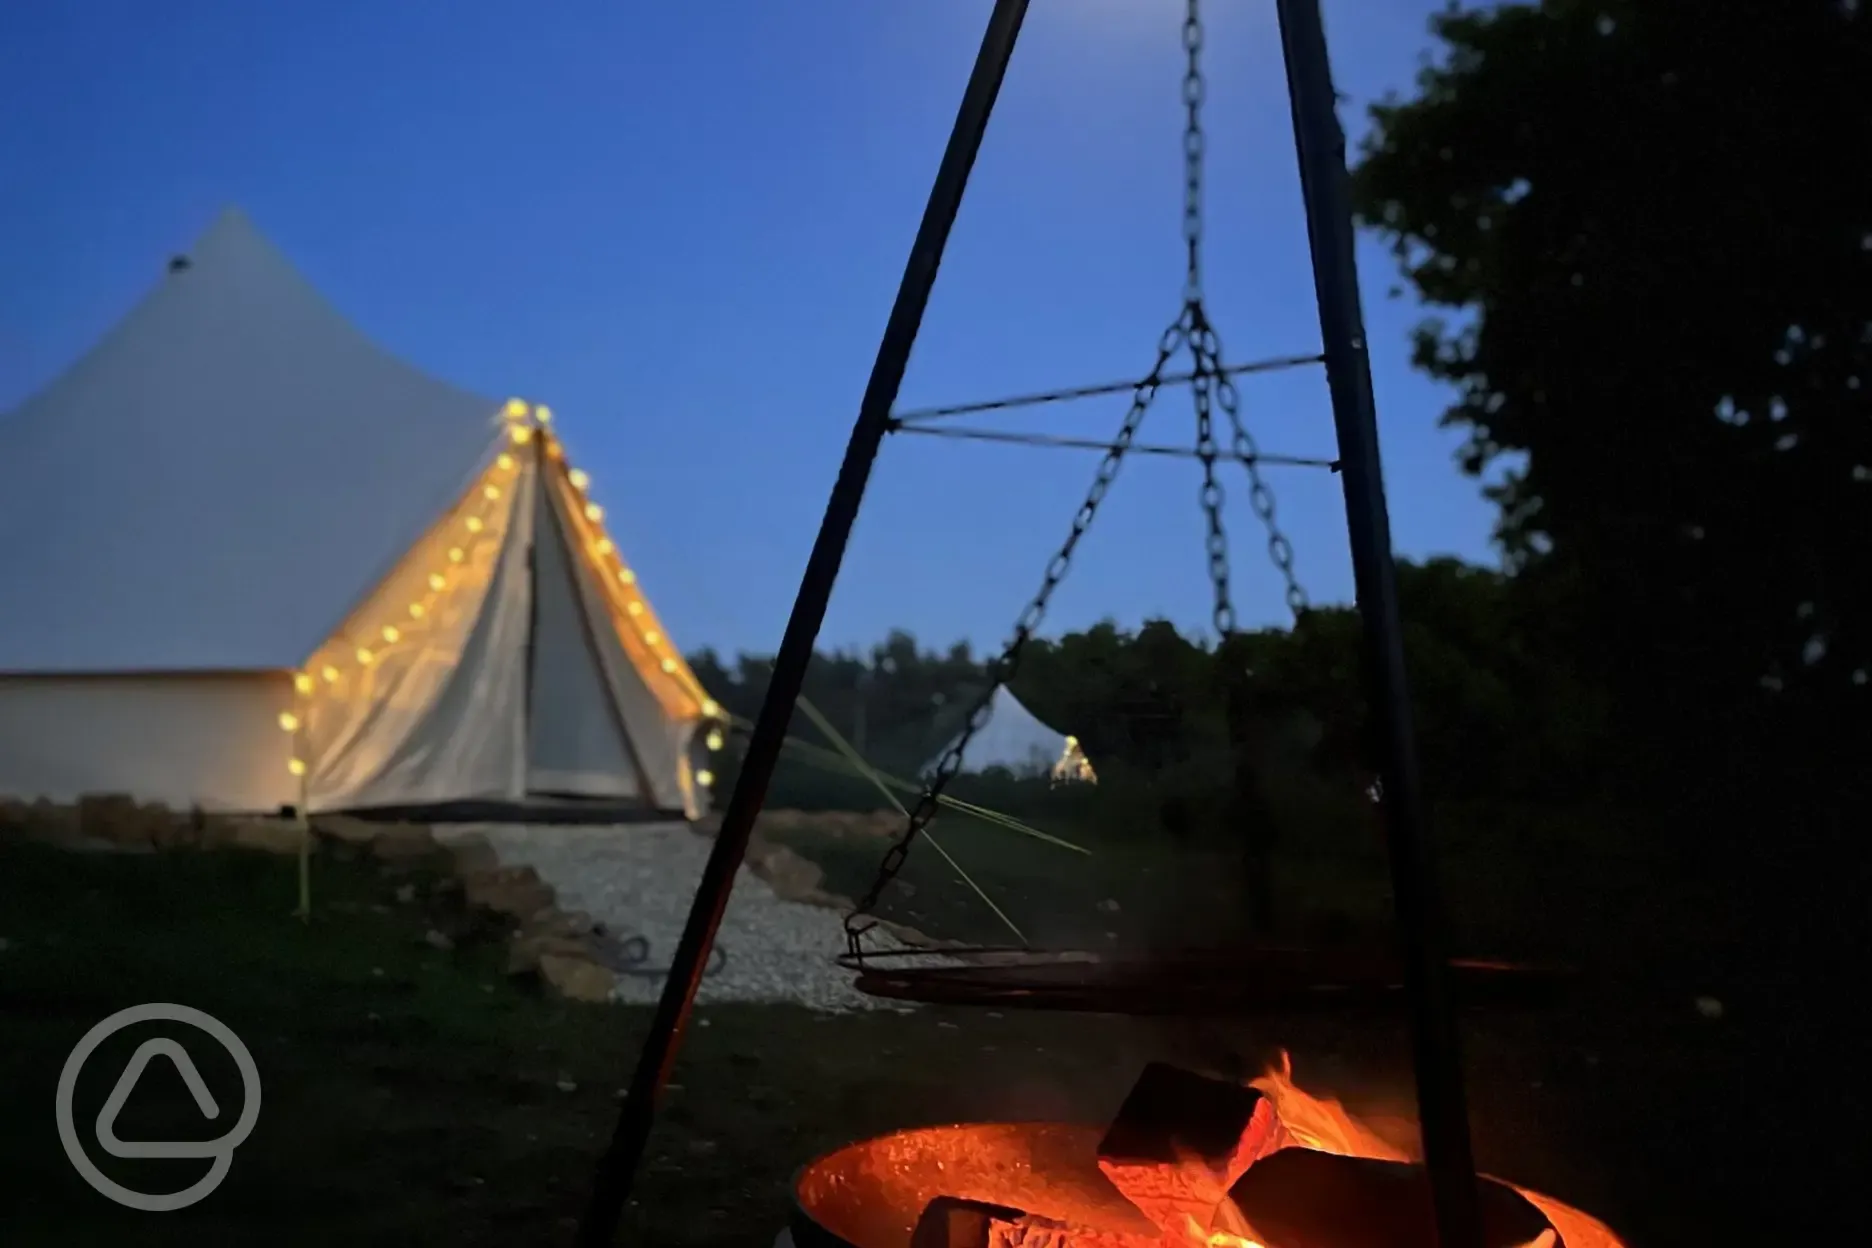 Bell tent at night